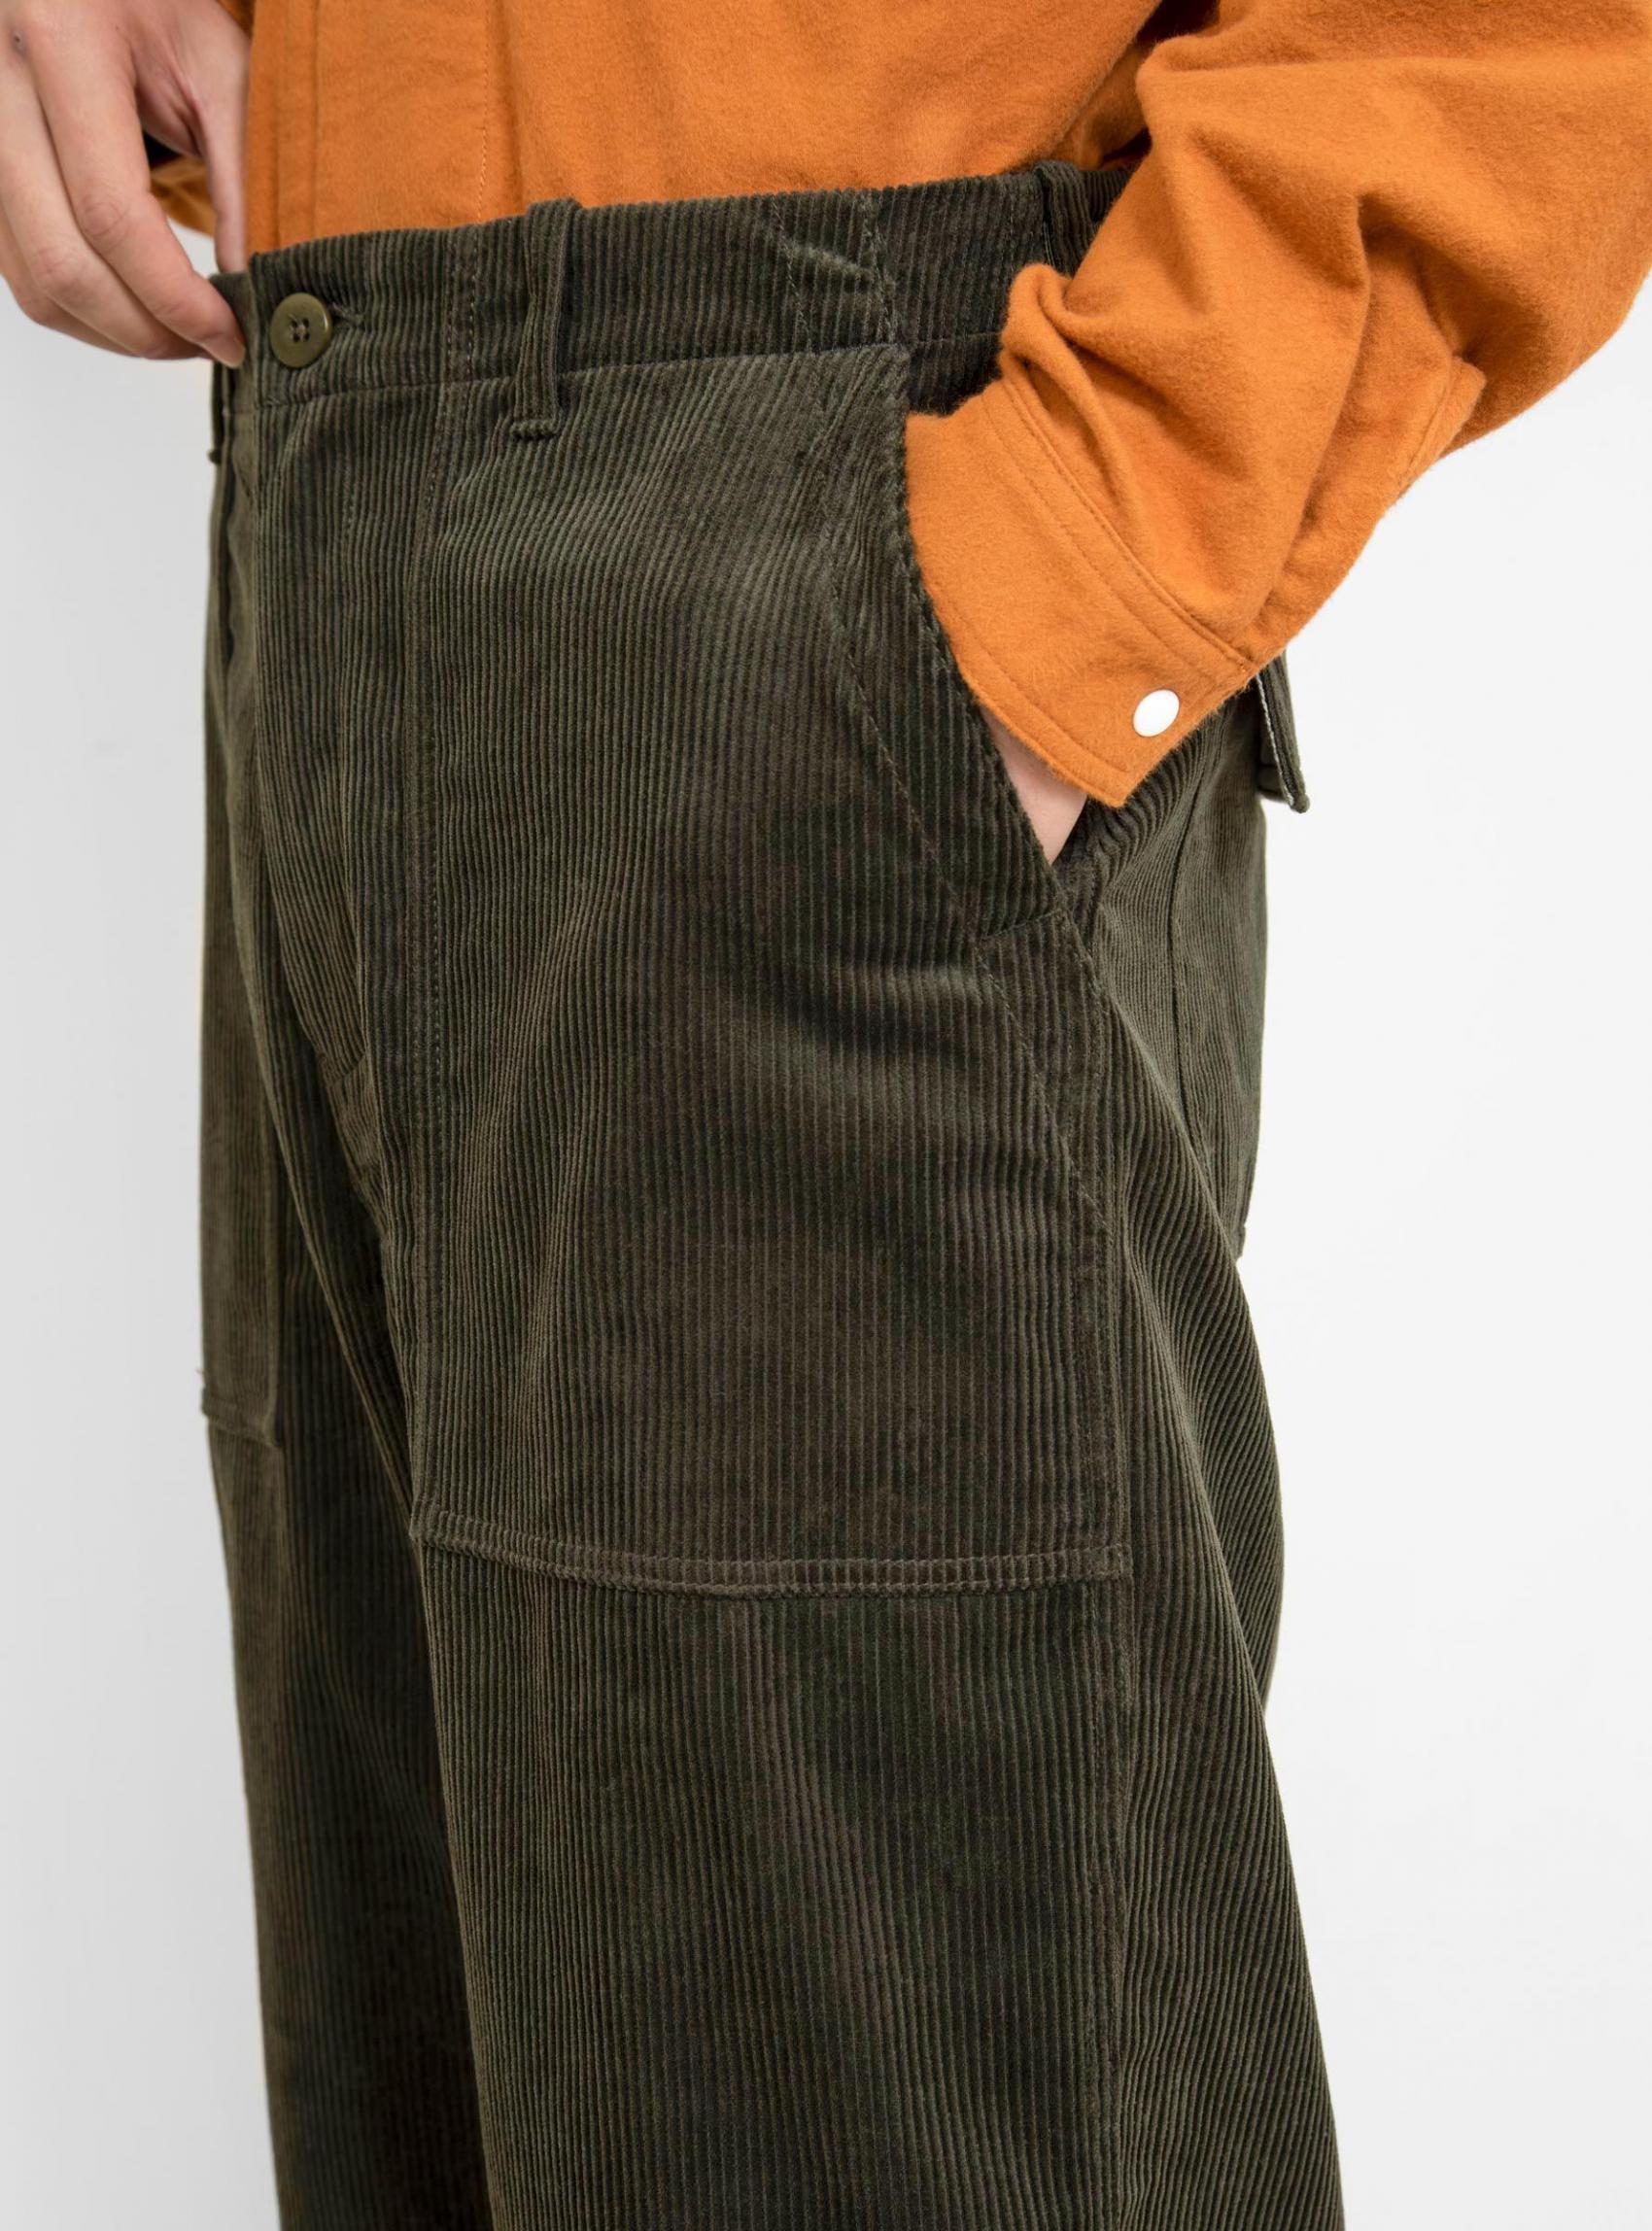 Trousers | Garbstore Mens Ruffle Pant Olive Green Green